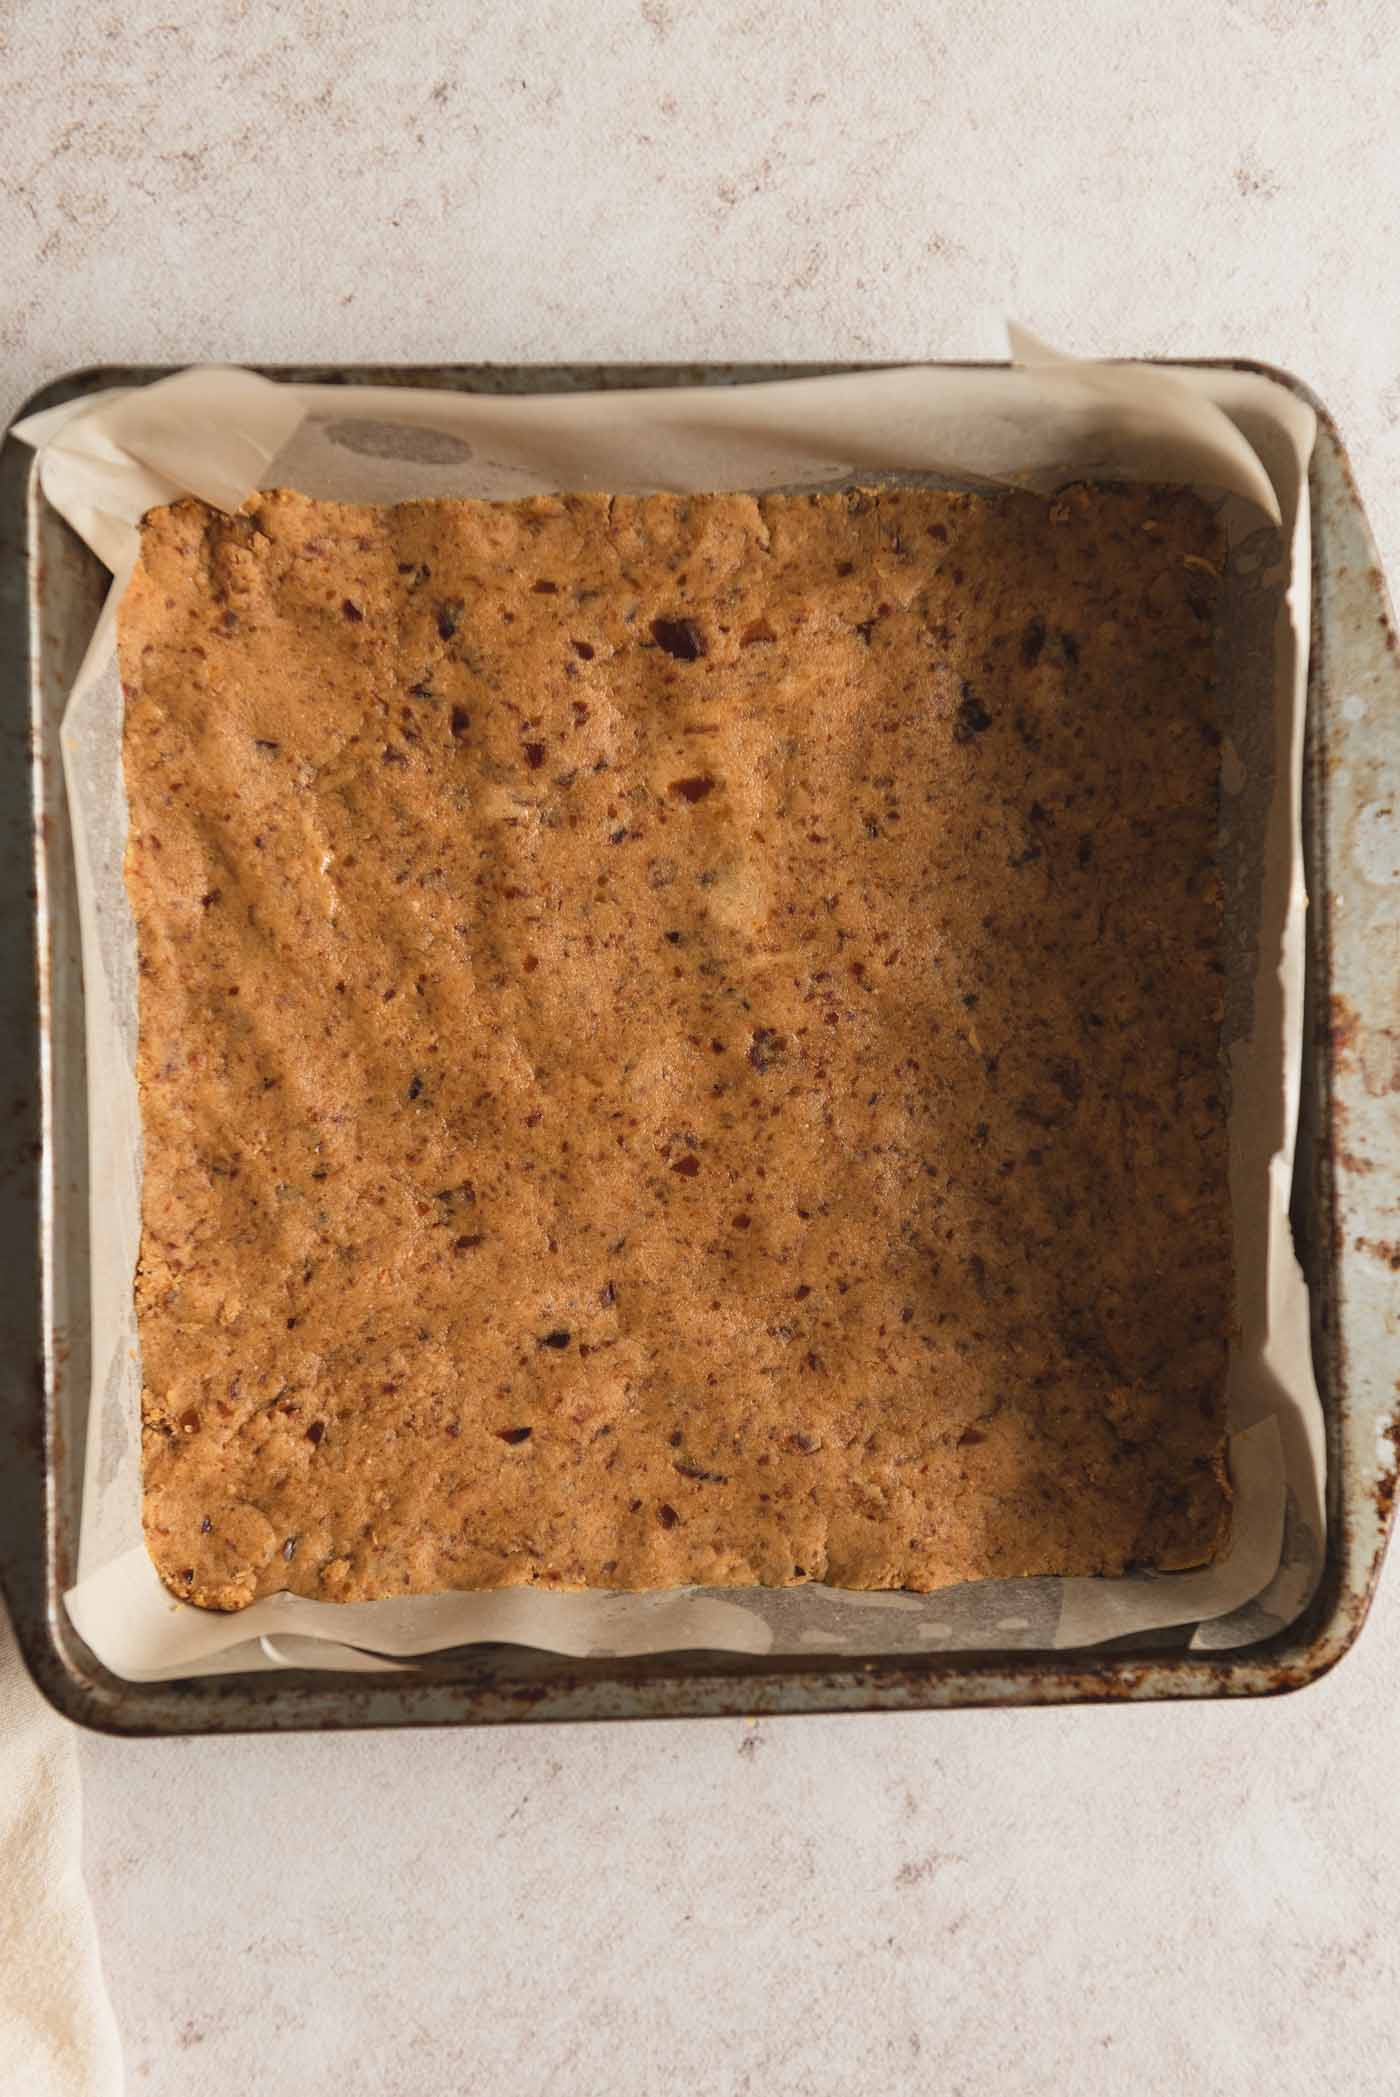 A layer of peanut butter dough for making peanut butter bars pressed into a square pan lined with parchment paper.